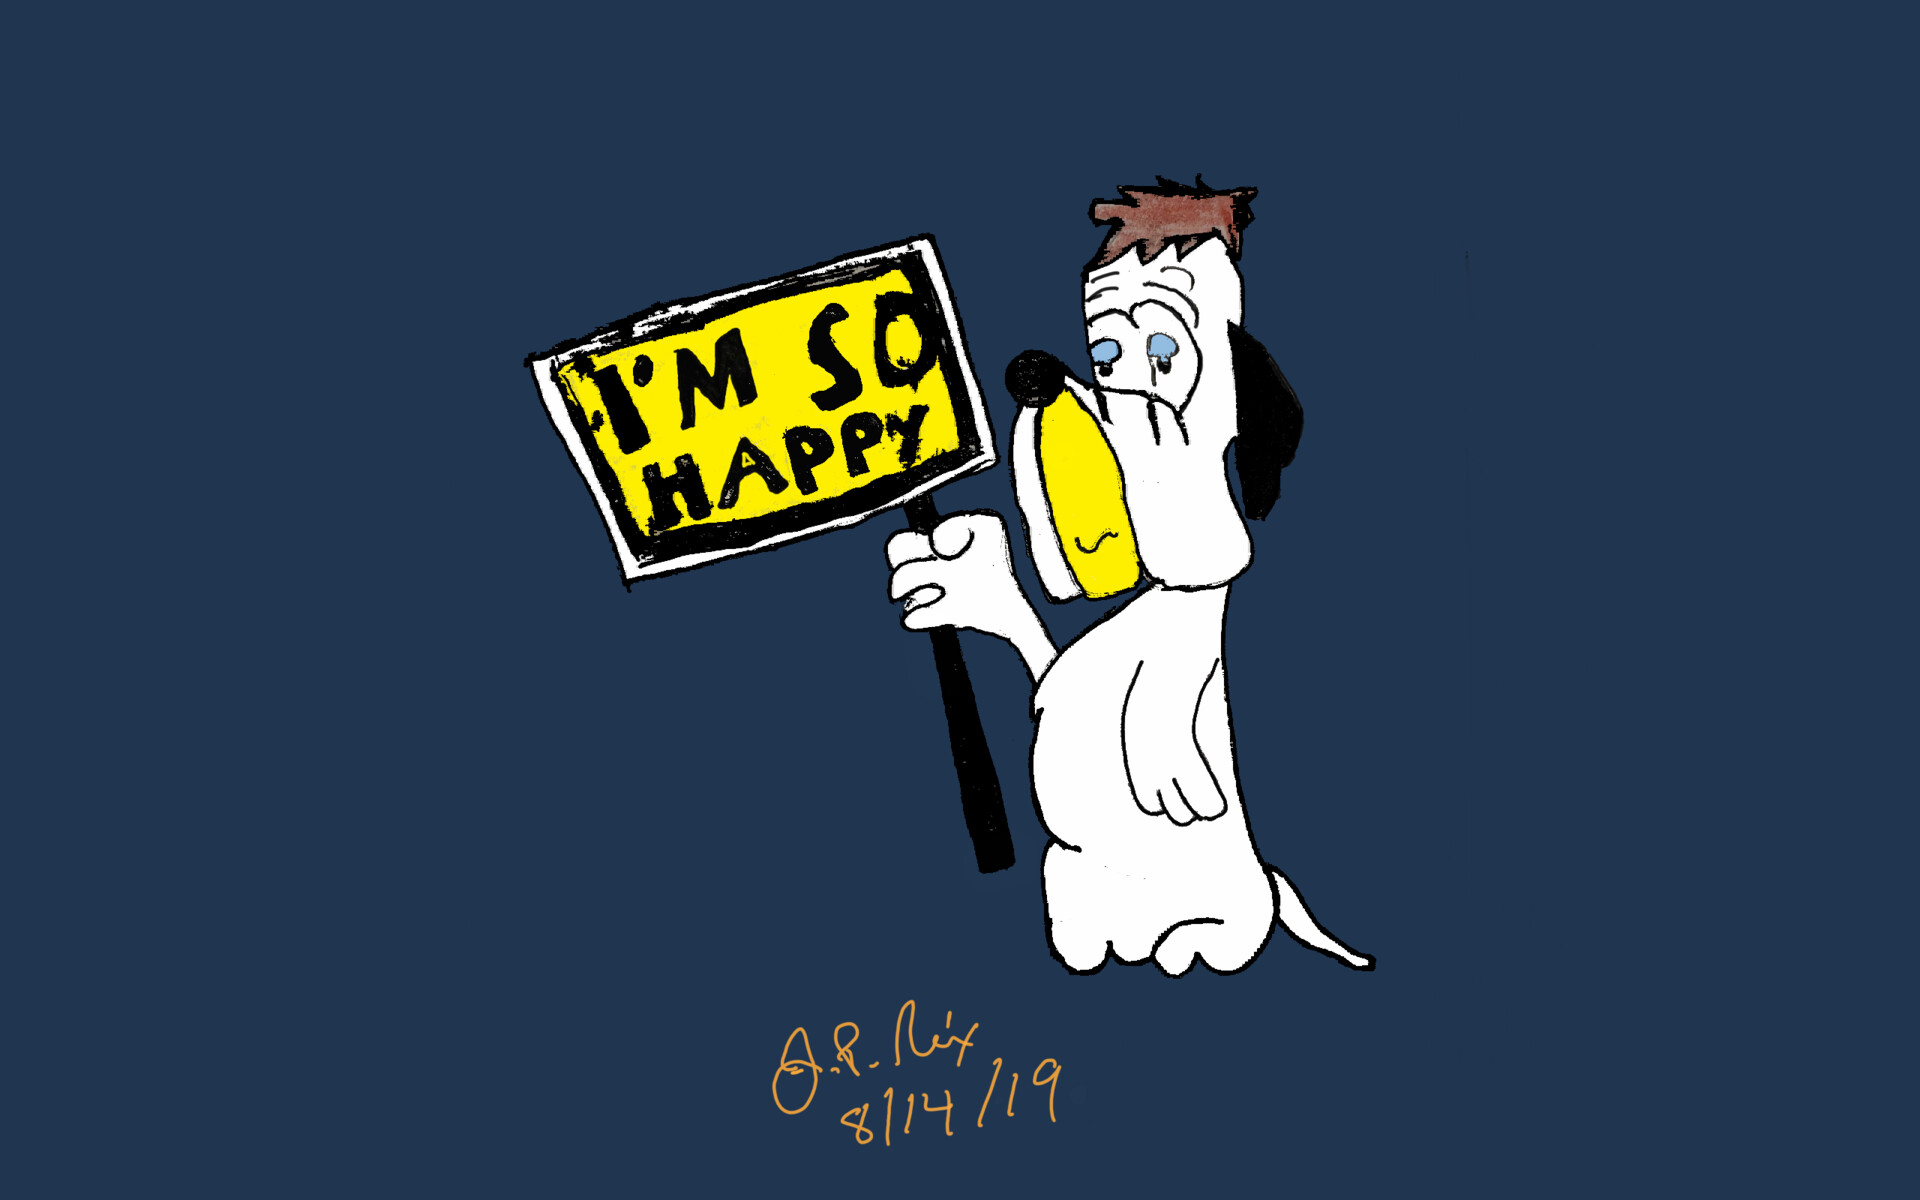 ArtStation - Last year's sketch of Droopy Dog now with digital colors